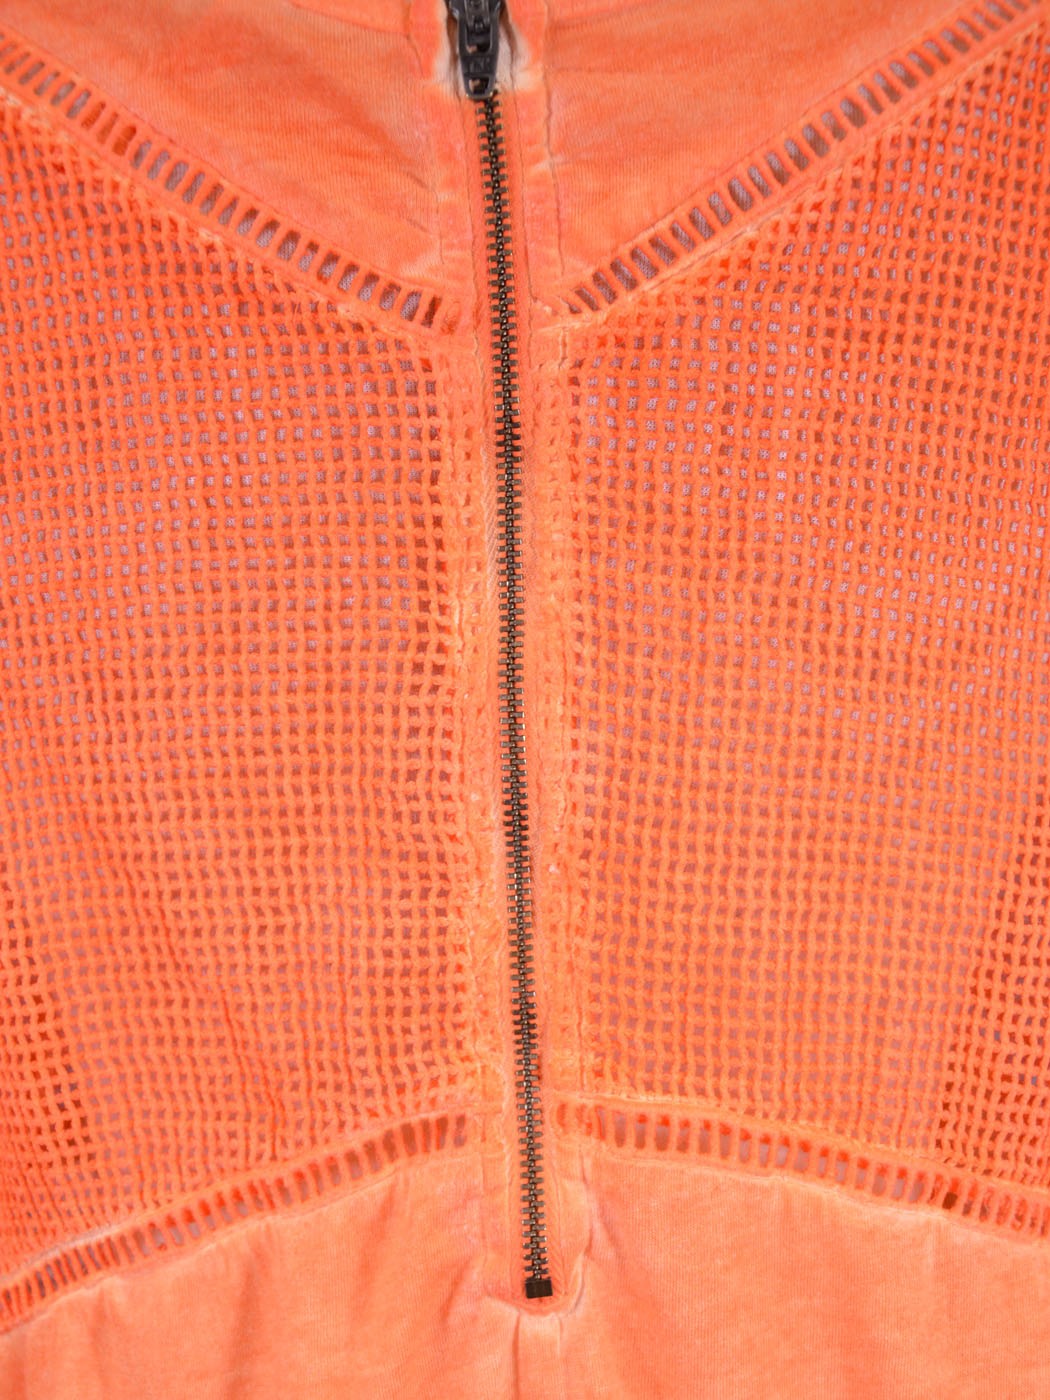 Gentle Fawn Brand Eames Tangerine Crochet Caged Sides Zipper Triangle Tank Top - ALILANG.COM